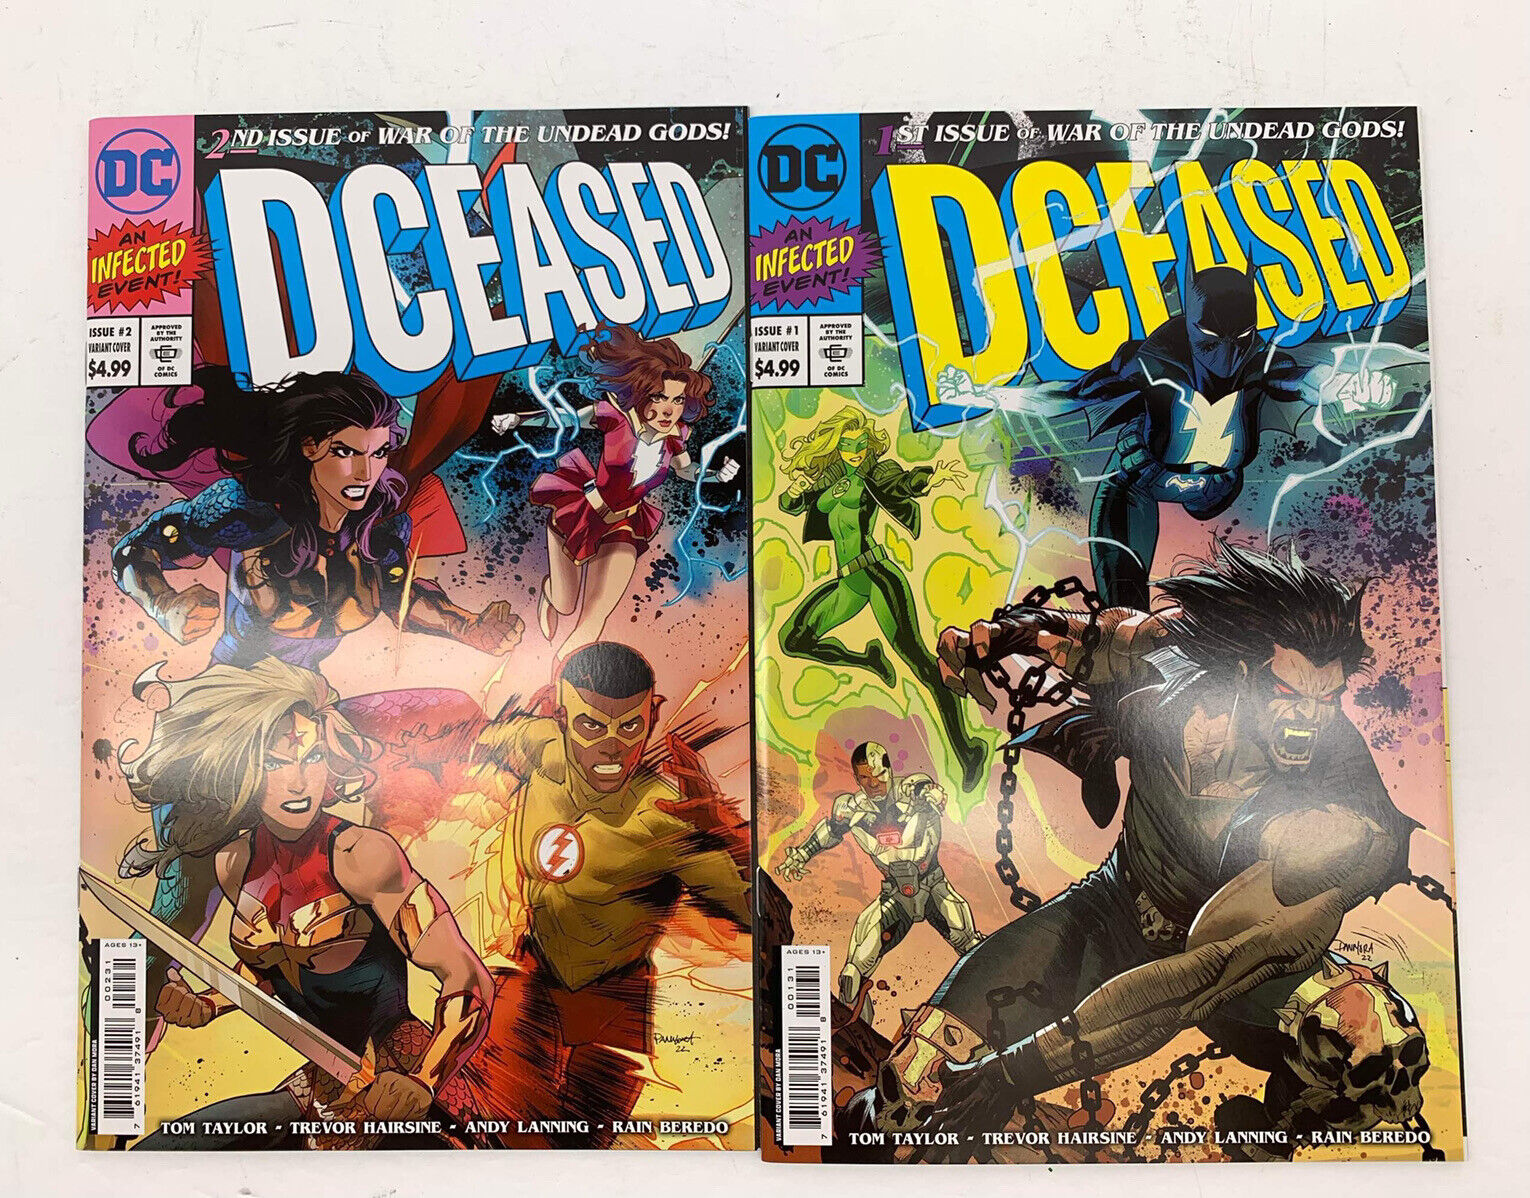 DC Dceased War of the Undead Gods #1 & #2 (of 8) Variant Cover By Dan Mora